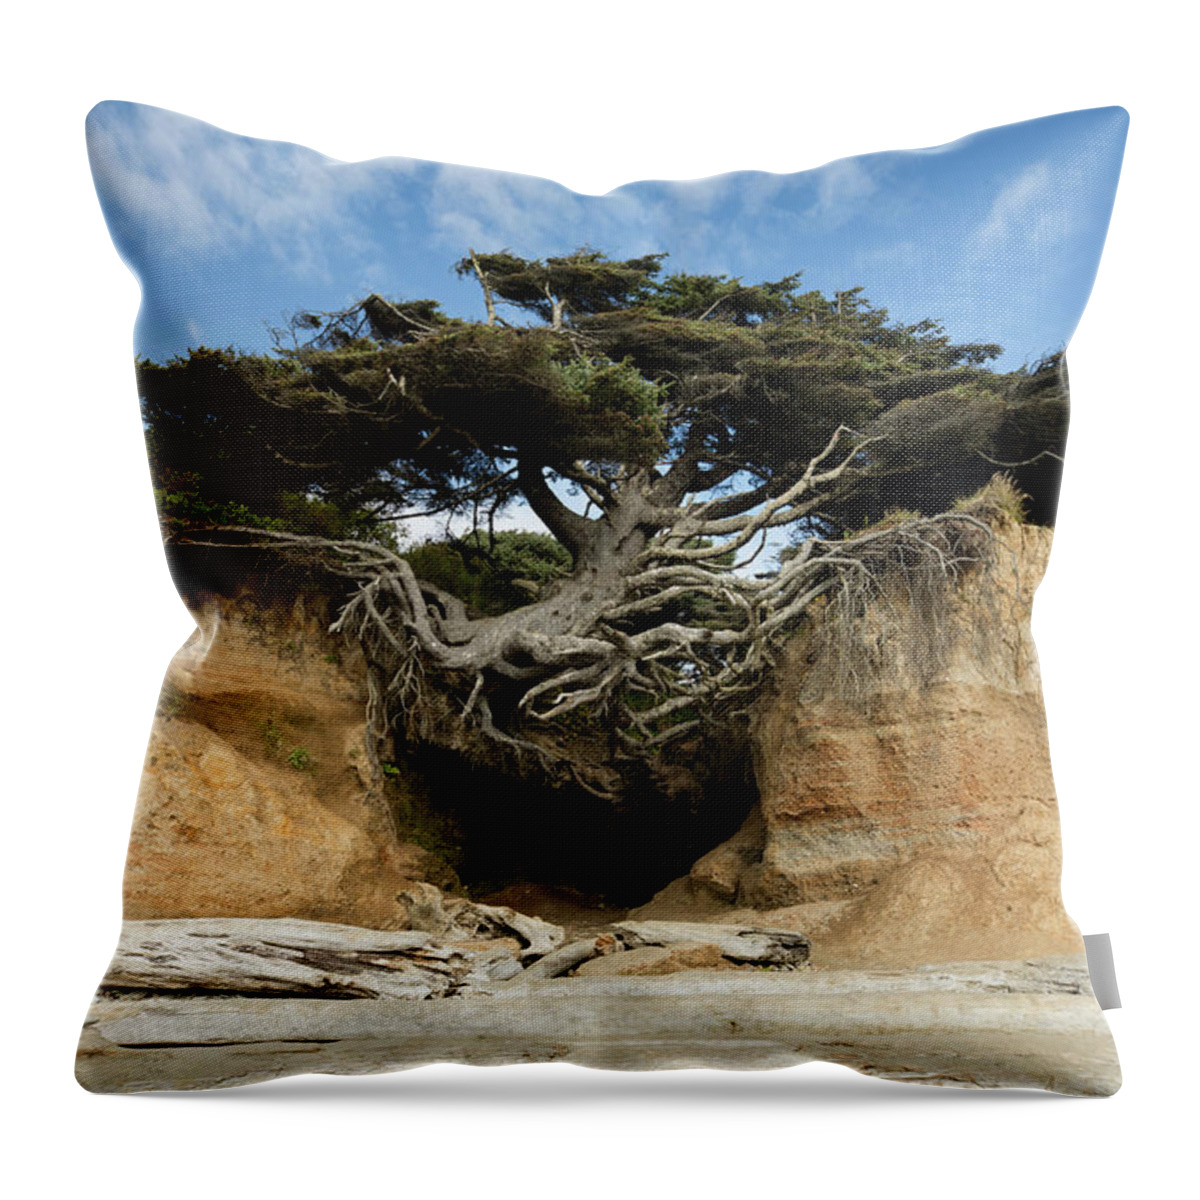 Photography Throw Pillow featuring the photograph Scenic View Of Tree Of Life, Kalaloch by Panoramic Images